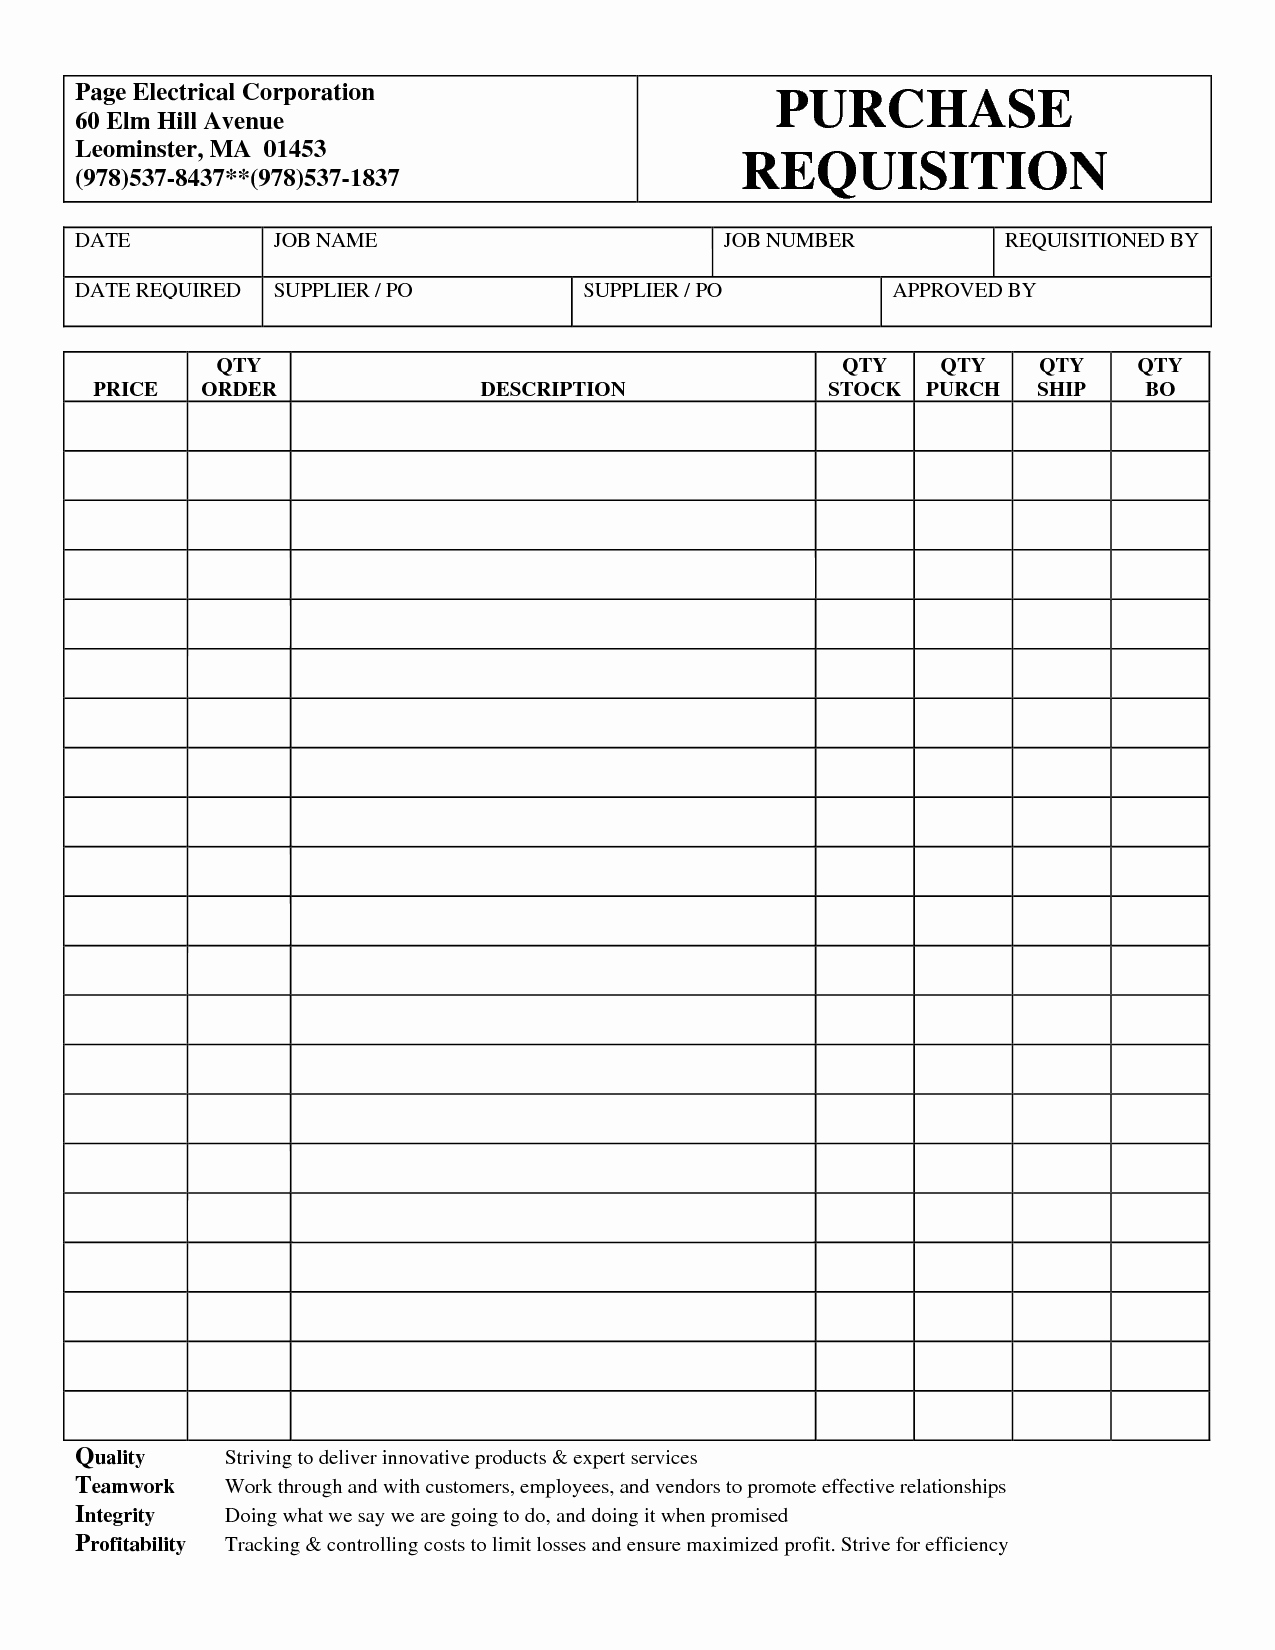 Excel Purchase order Template Free Lovely Best S Of Purchase Request form Template Excel